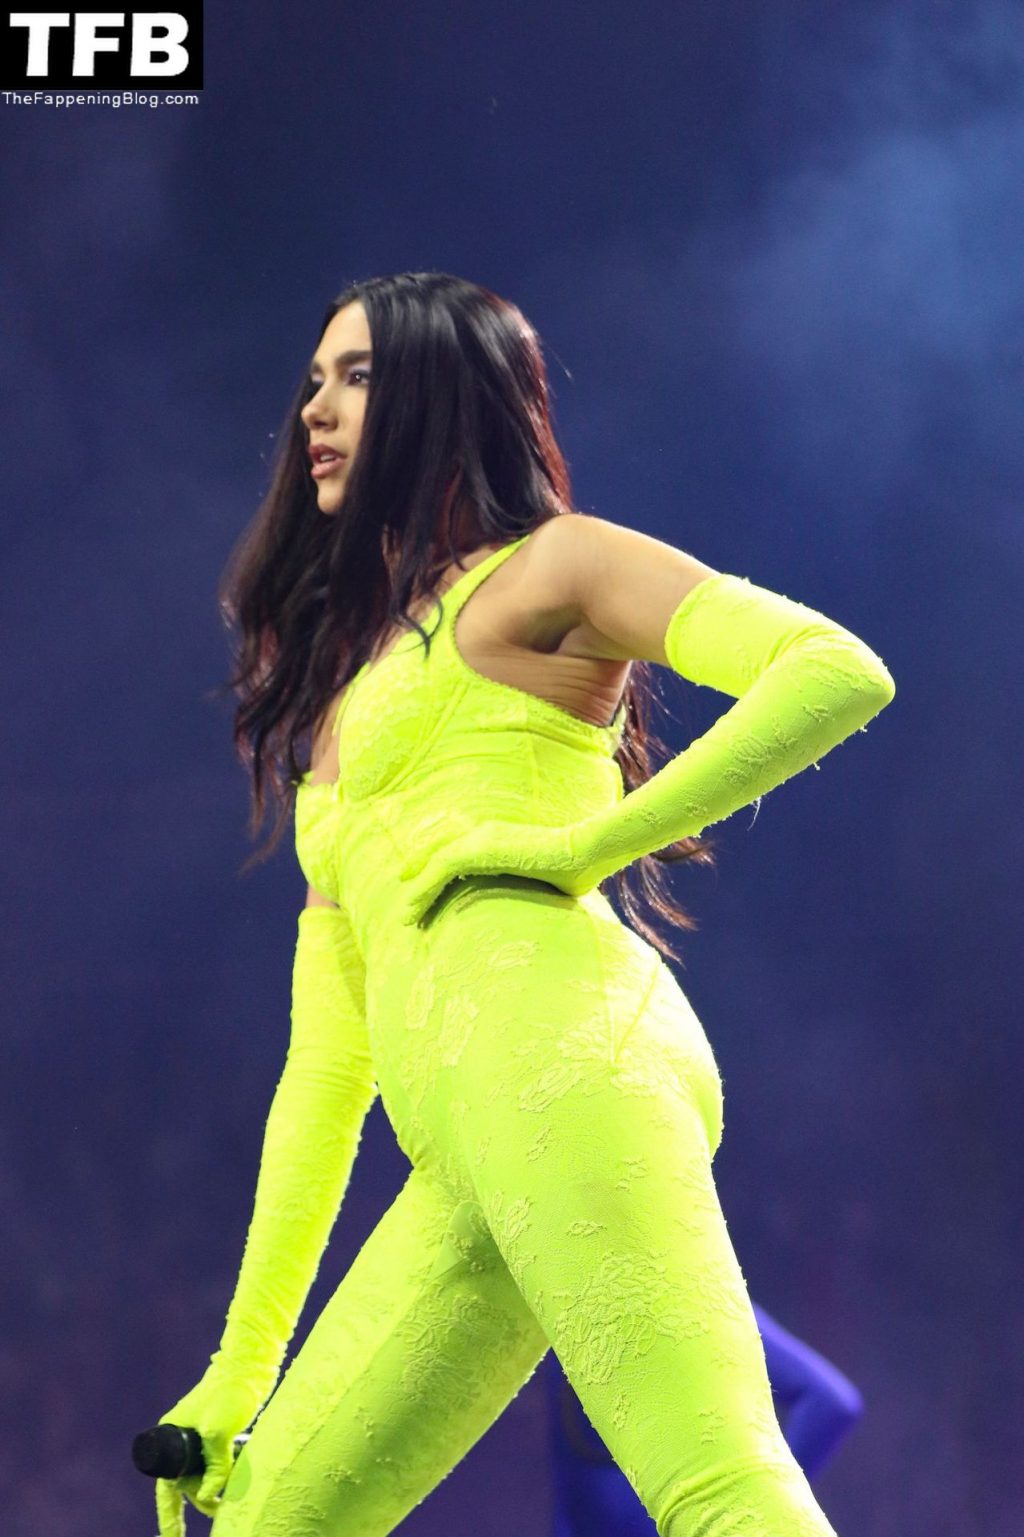 Dua Lipa Sexy The Fappening Blog 16 2 1024x1537 - Dua Lipa Shows Off Her Sexy Body on Stage as She Performs During the Future Nostalgia Tour (97 Photos)